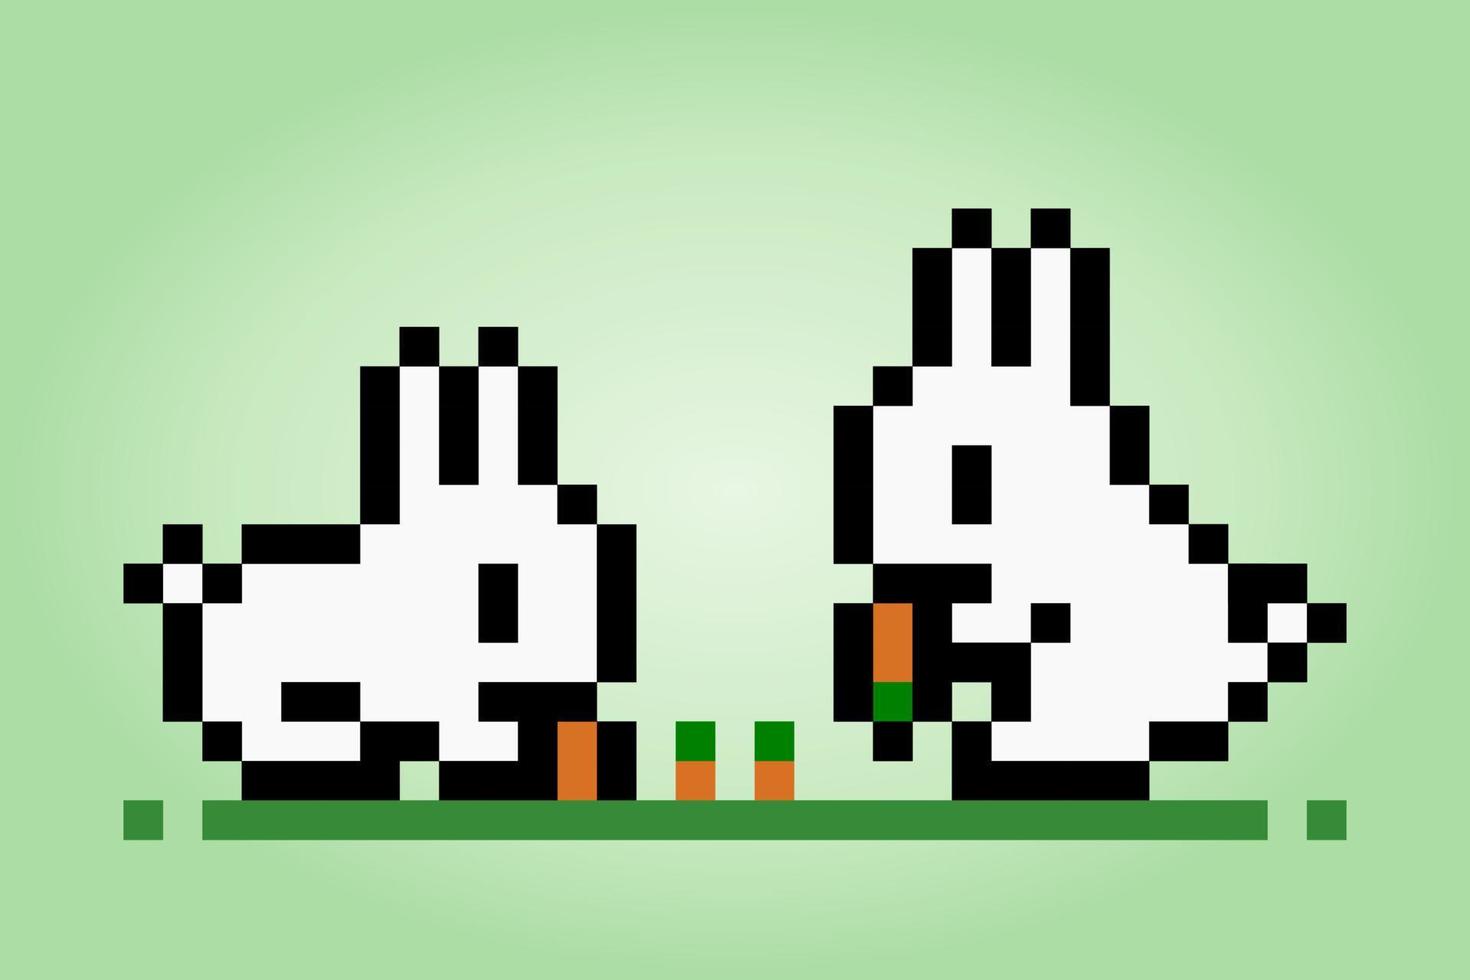 8 bit pixels rabbit. Animals for game assets and cross stitch patterns in vector illustrations.